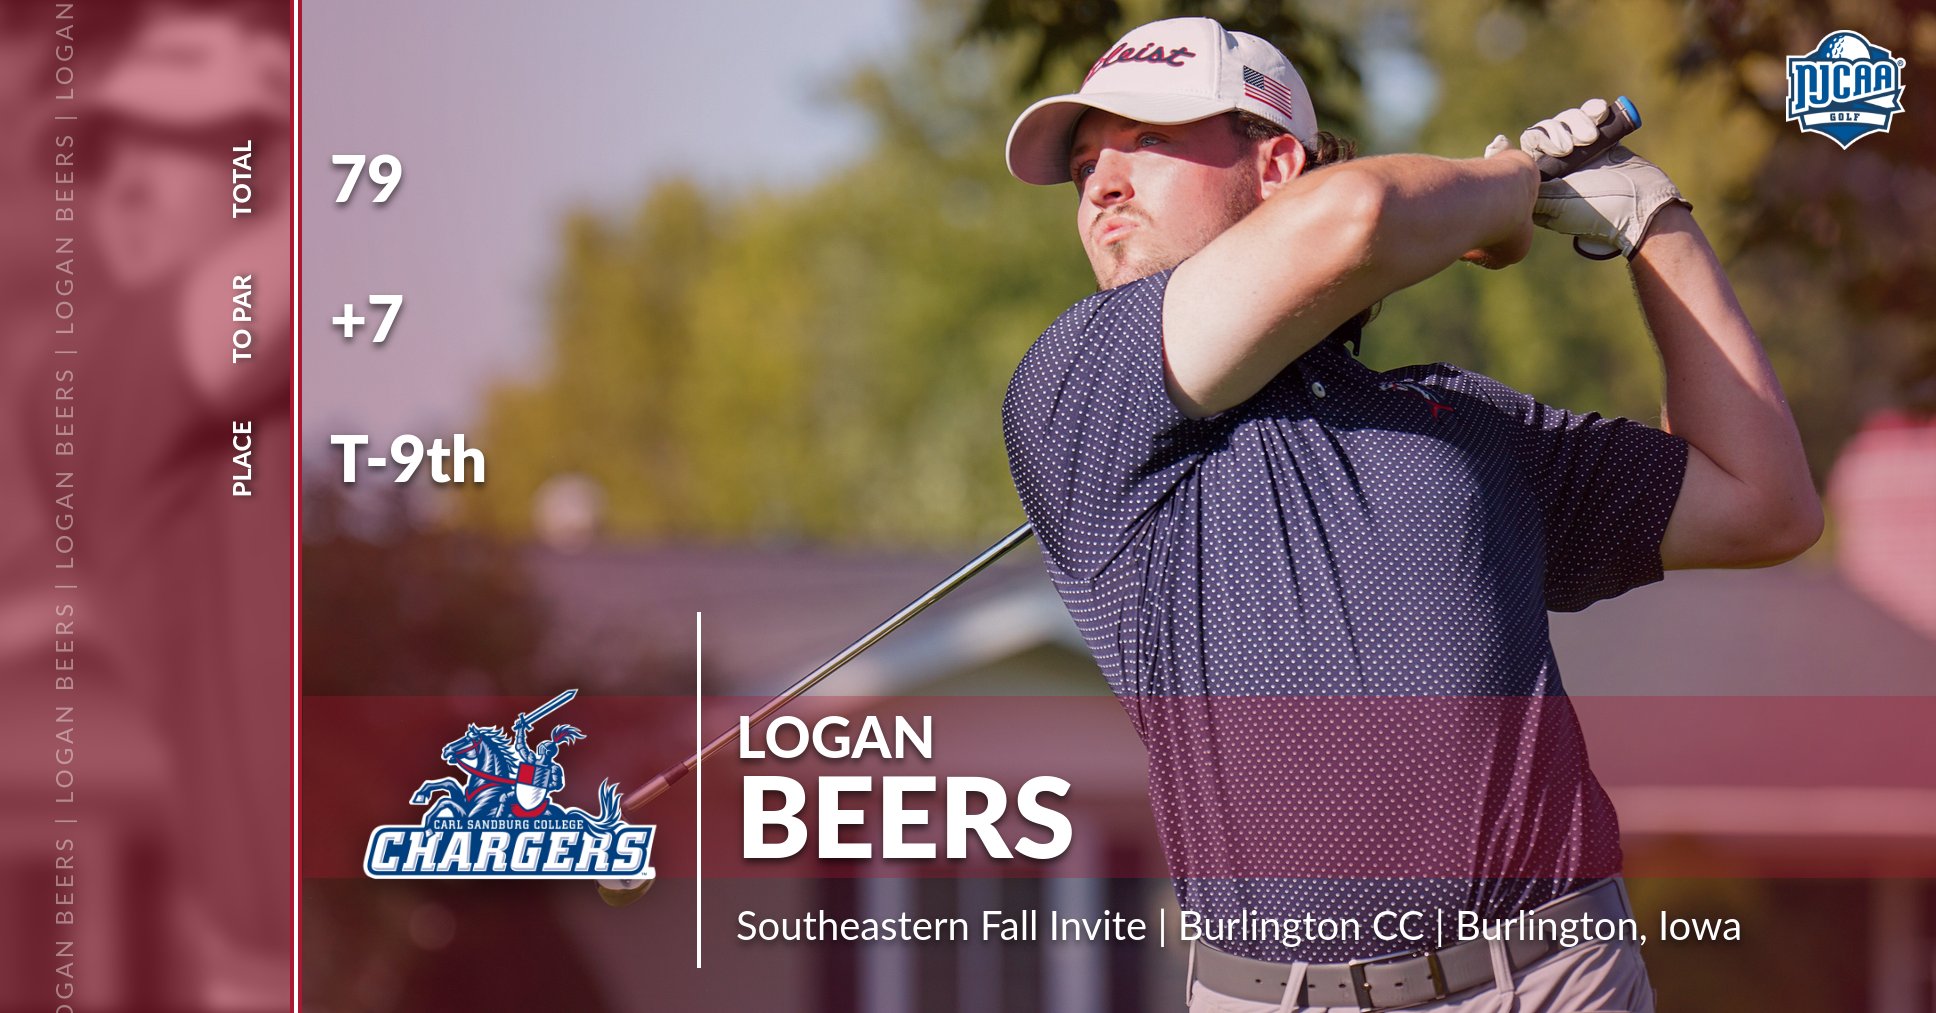 Beers Ties for 9th at Southeastern Fall Invite as Chargers Place 5th